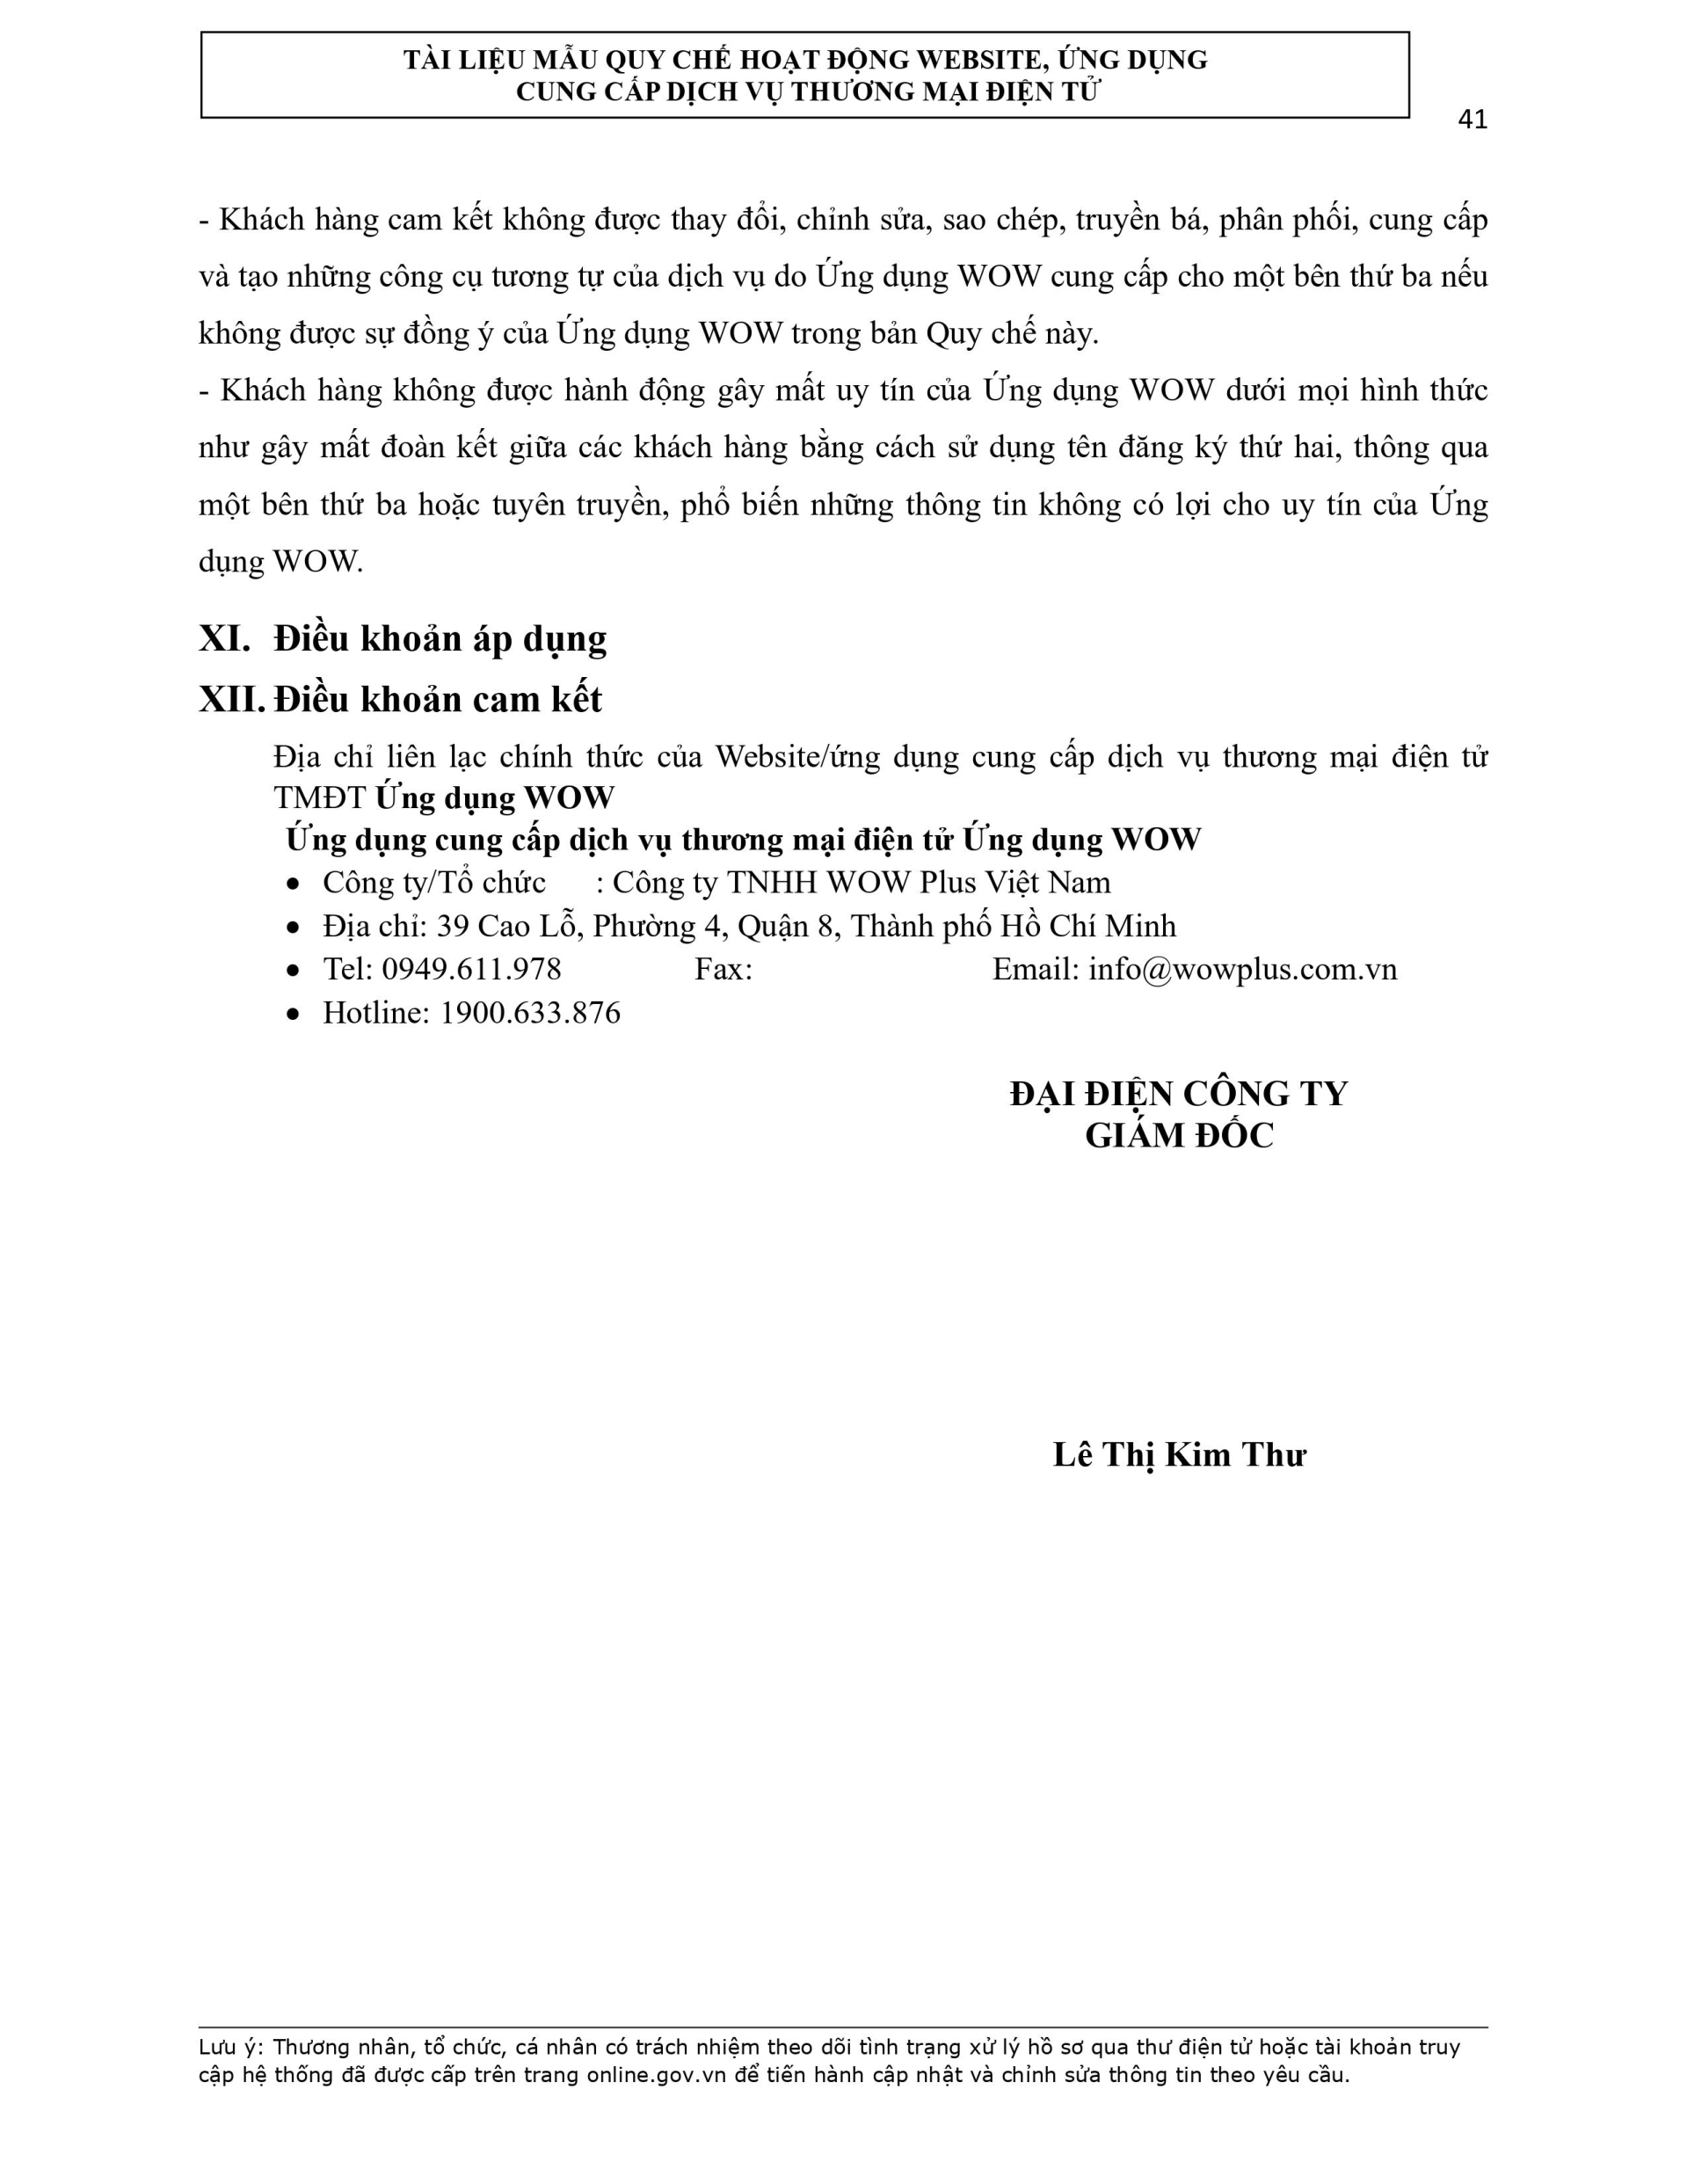 quy-che-hoat-dong-ung-dung-wow-page-0041